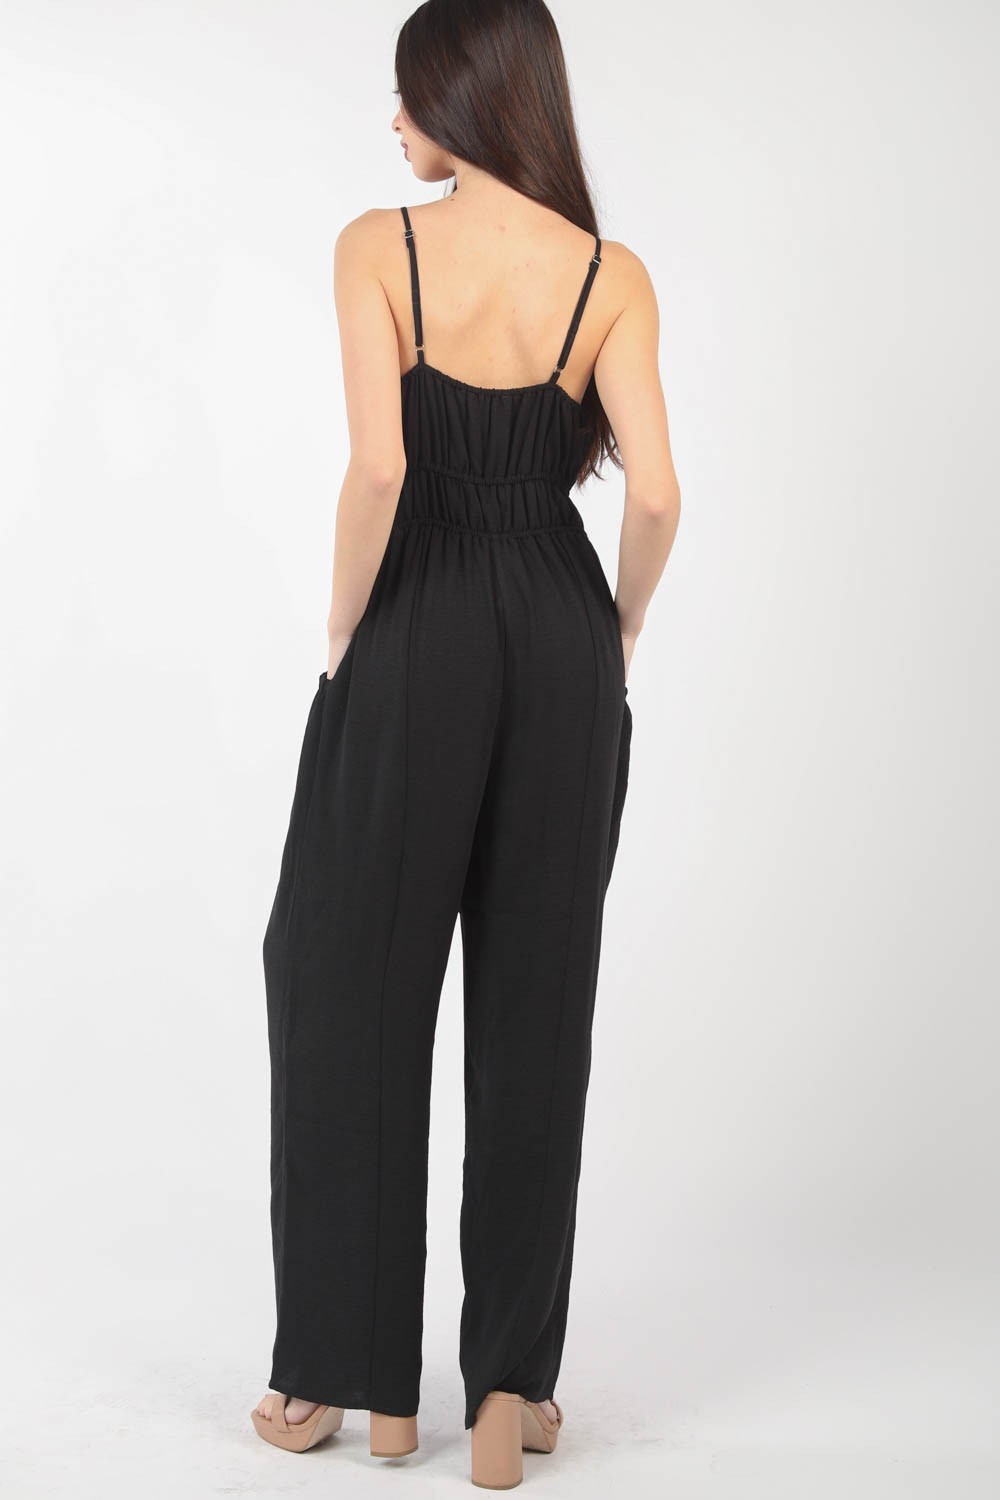 This Pintuck Detail Woven Sleeveless Jumpsuit is a chic and versatile piece for your wardrobe. The pintuck detailing adds a touch of sophistication to the sleeveless jumpsuit silhouette. Made from woven fabric, this jumpsuit offers a sleek and polished look. S - L